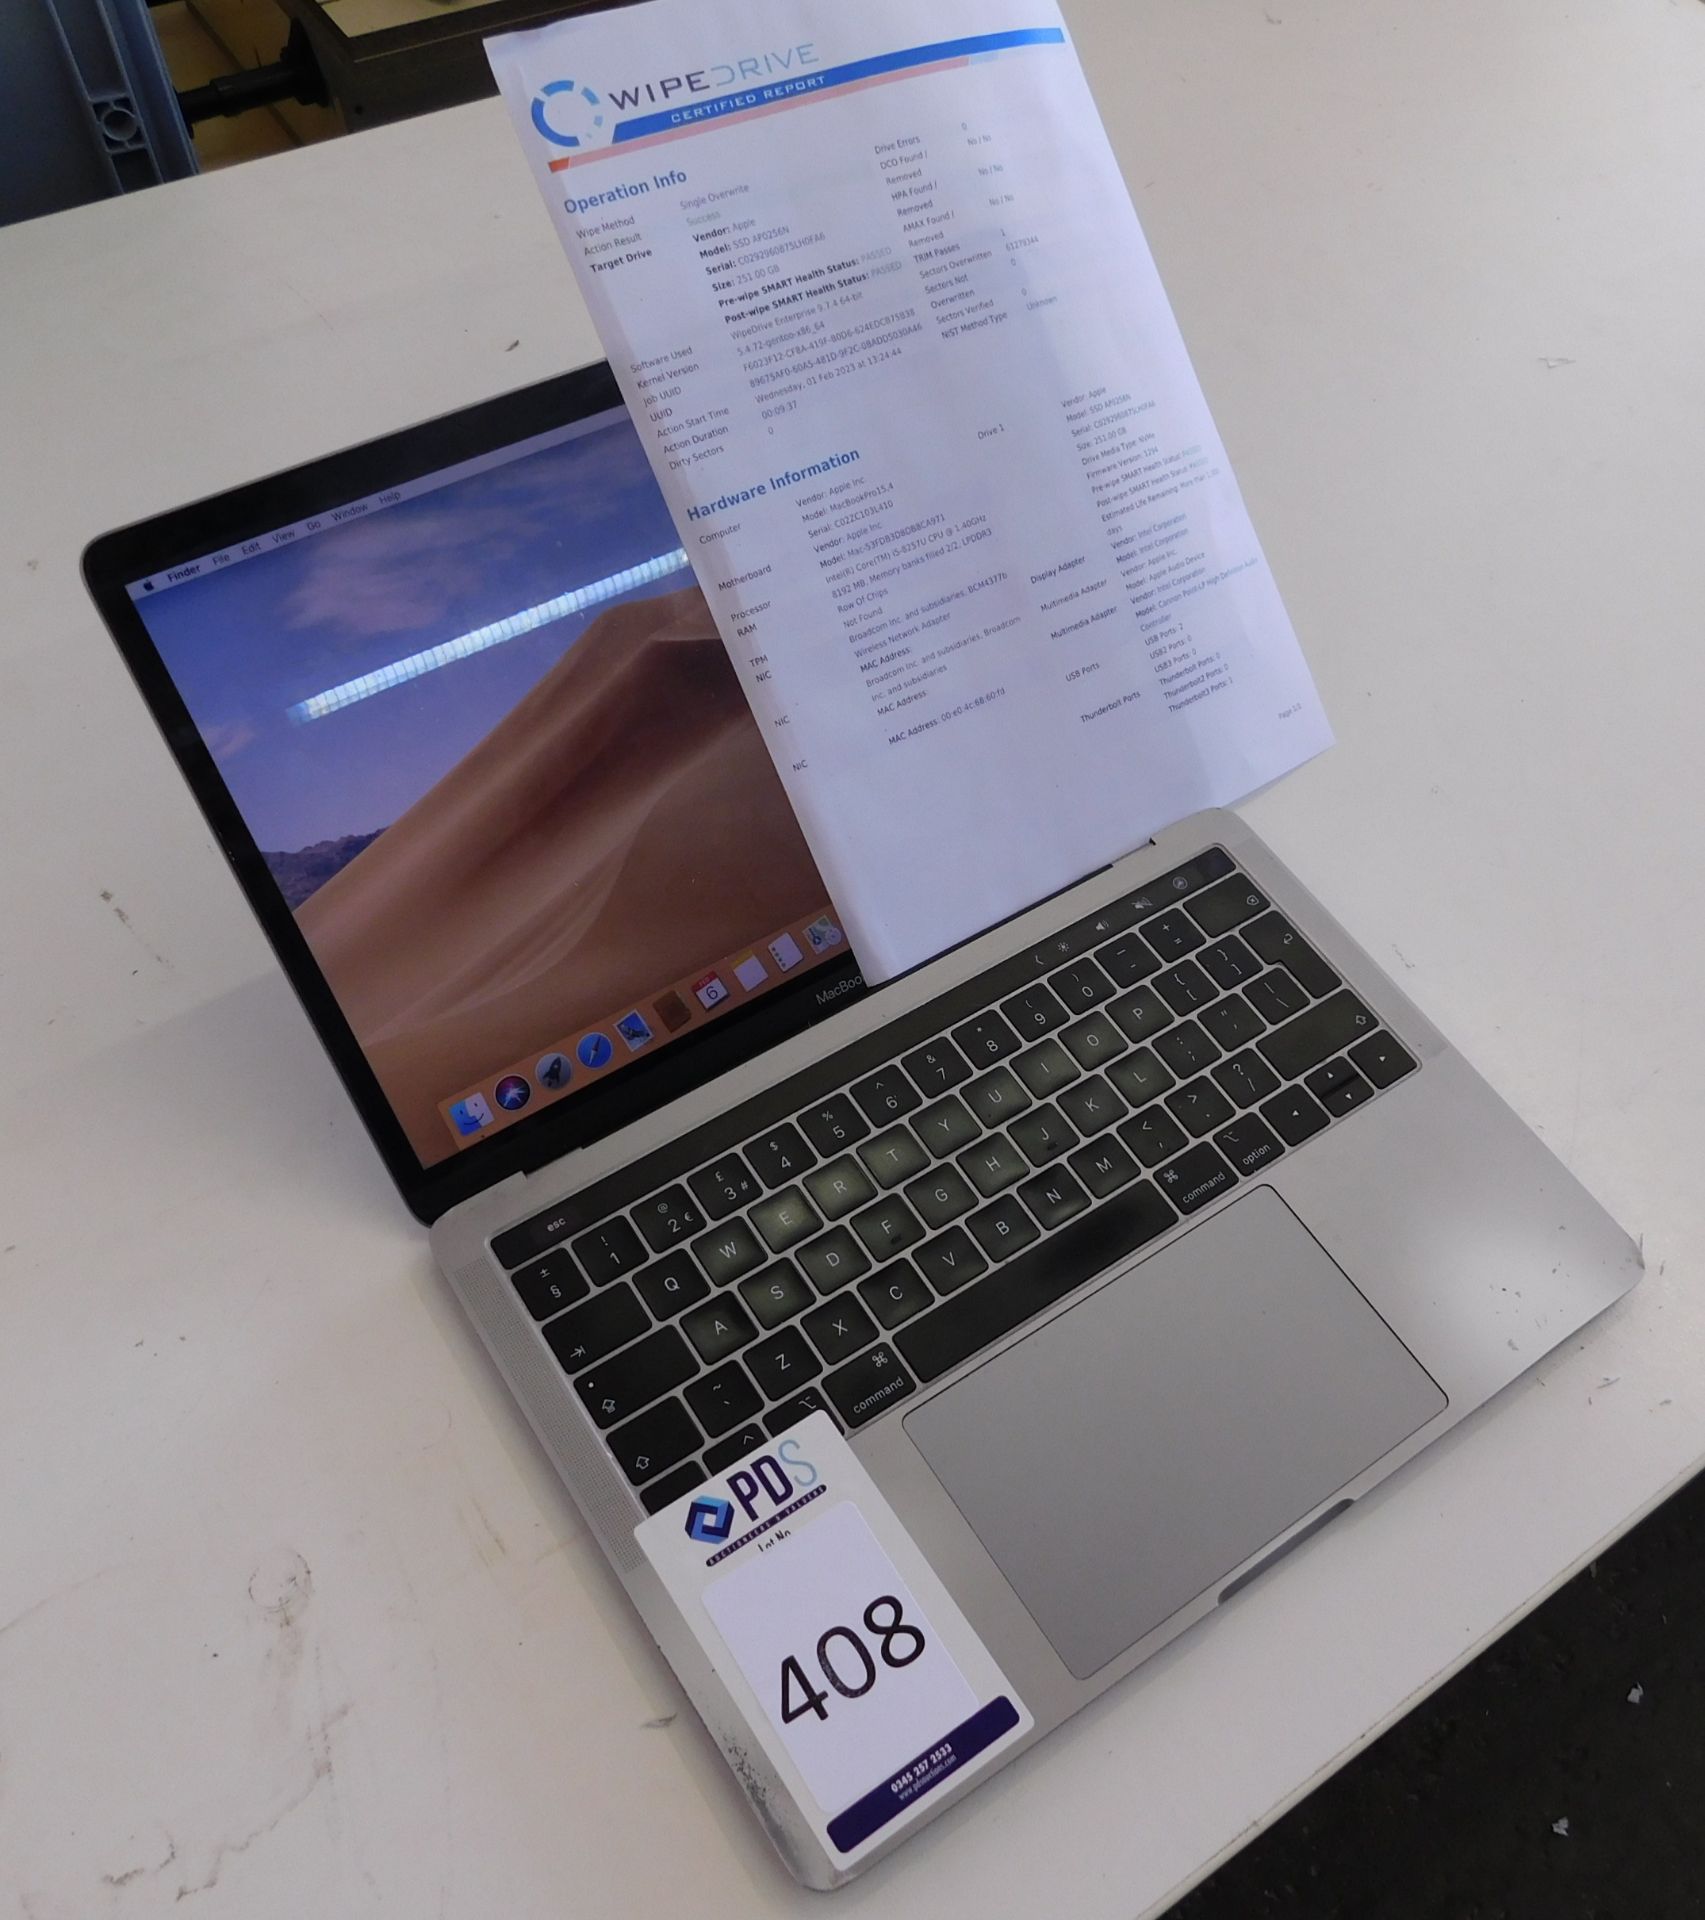 Apple MacBook Pro, A2159, Serial Number C02ZC103L410, i5 @1.40 GHz, 8GB RAM, 251GB SSD, OS Installed - Image 2 of 5